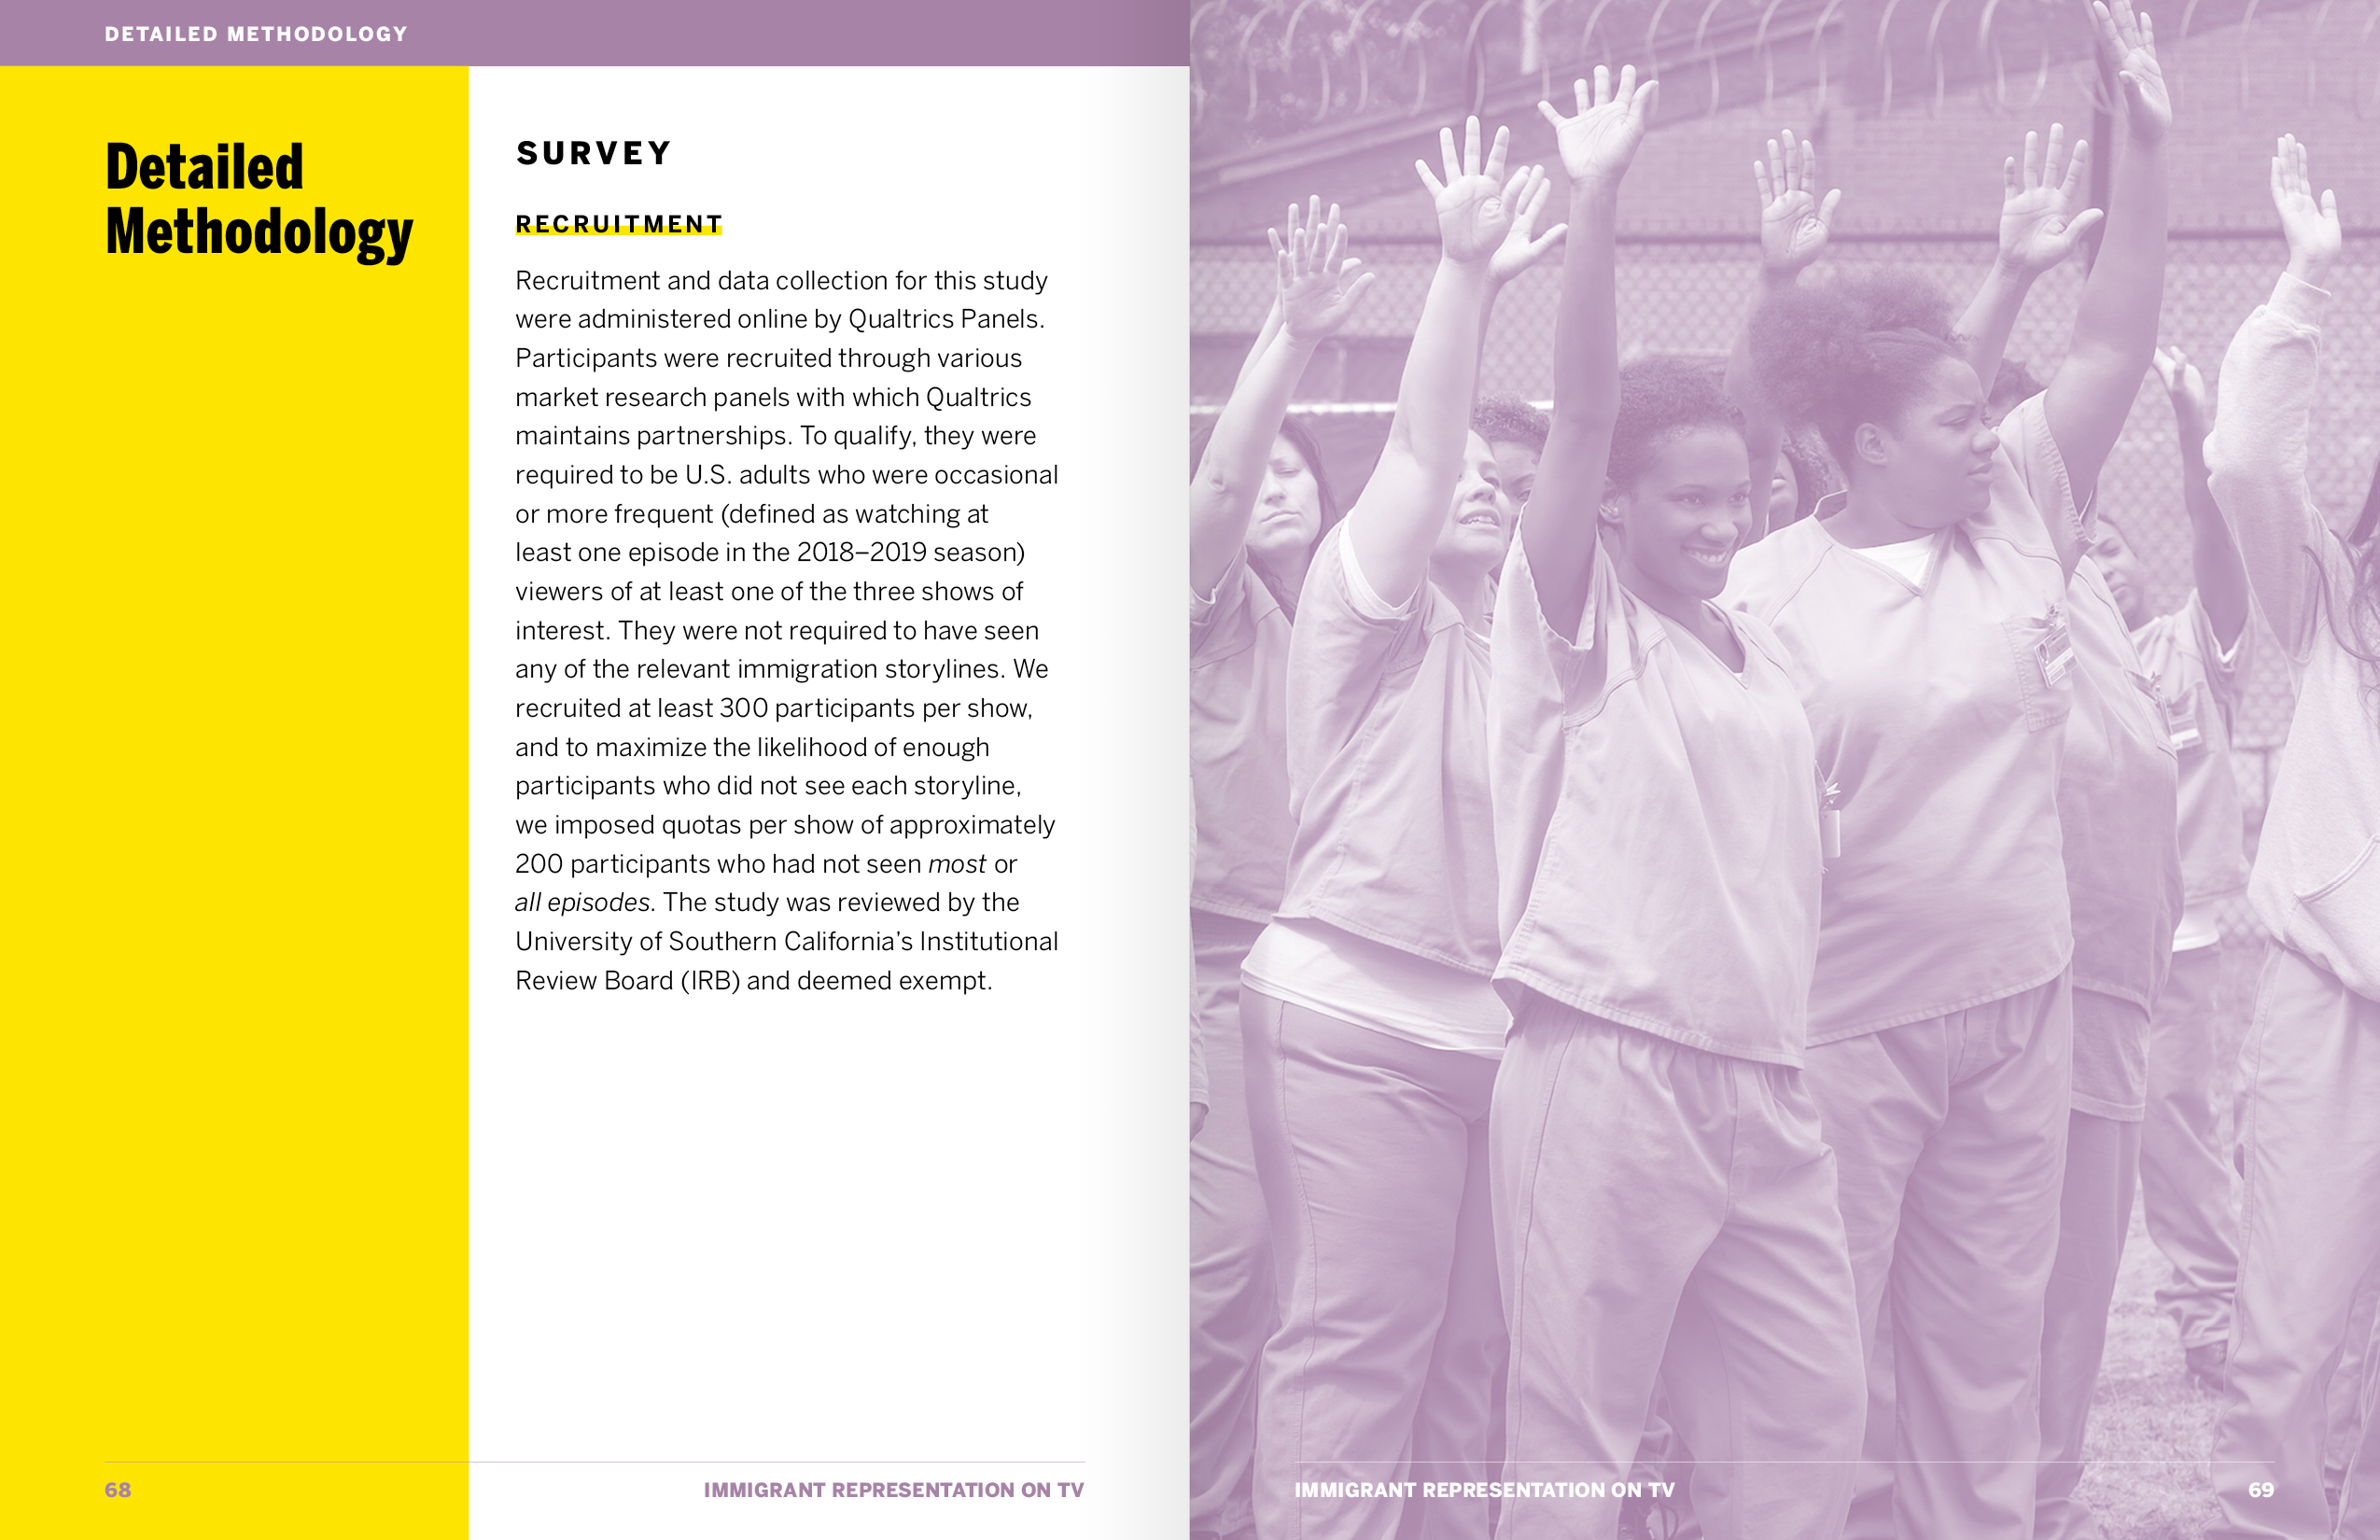 A spread from the Methodology section of the report, discussing recruitment for the study. On the right is a still from the show Orange is the New Black, of a crowd of women with their hands raised.